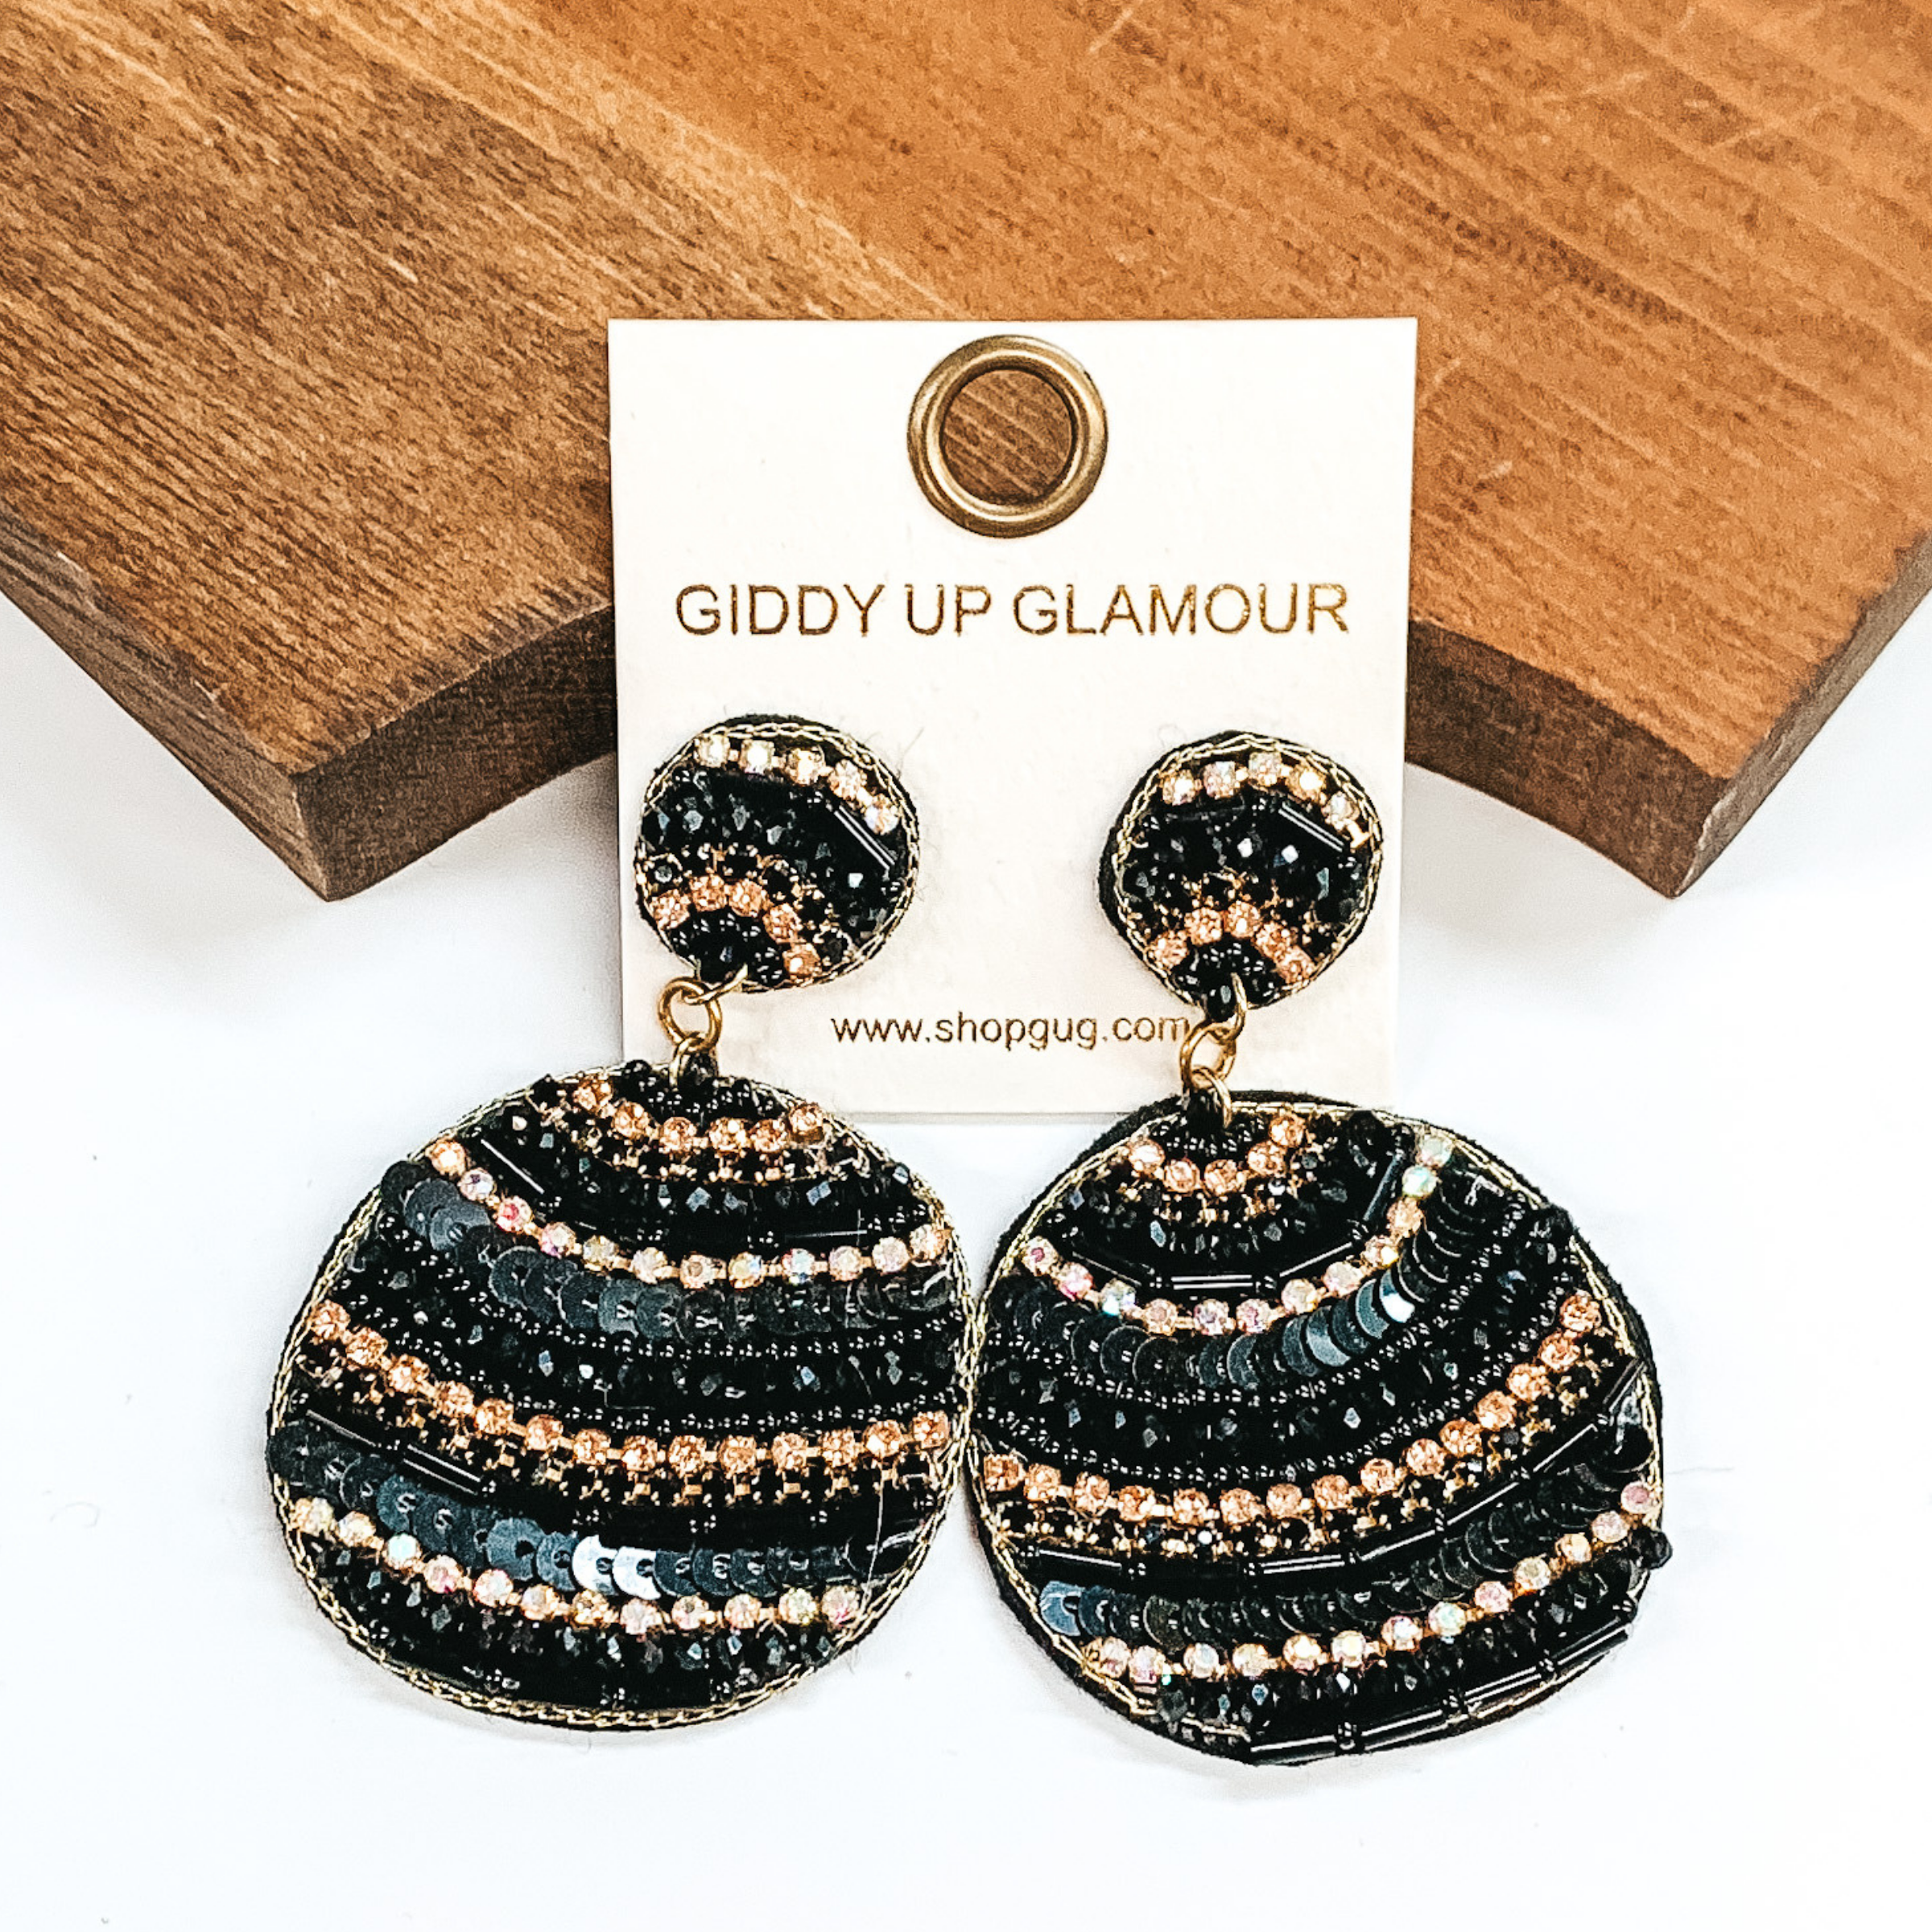 Black cirle drop earrings with different striped beaded patterns. Striped patterns in long and small  black beads, black sequins, with ab, black, and gold crystals. Taken in a white  background with a brown block as decor.